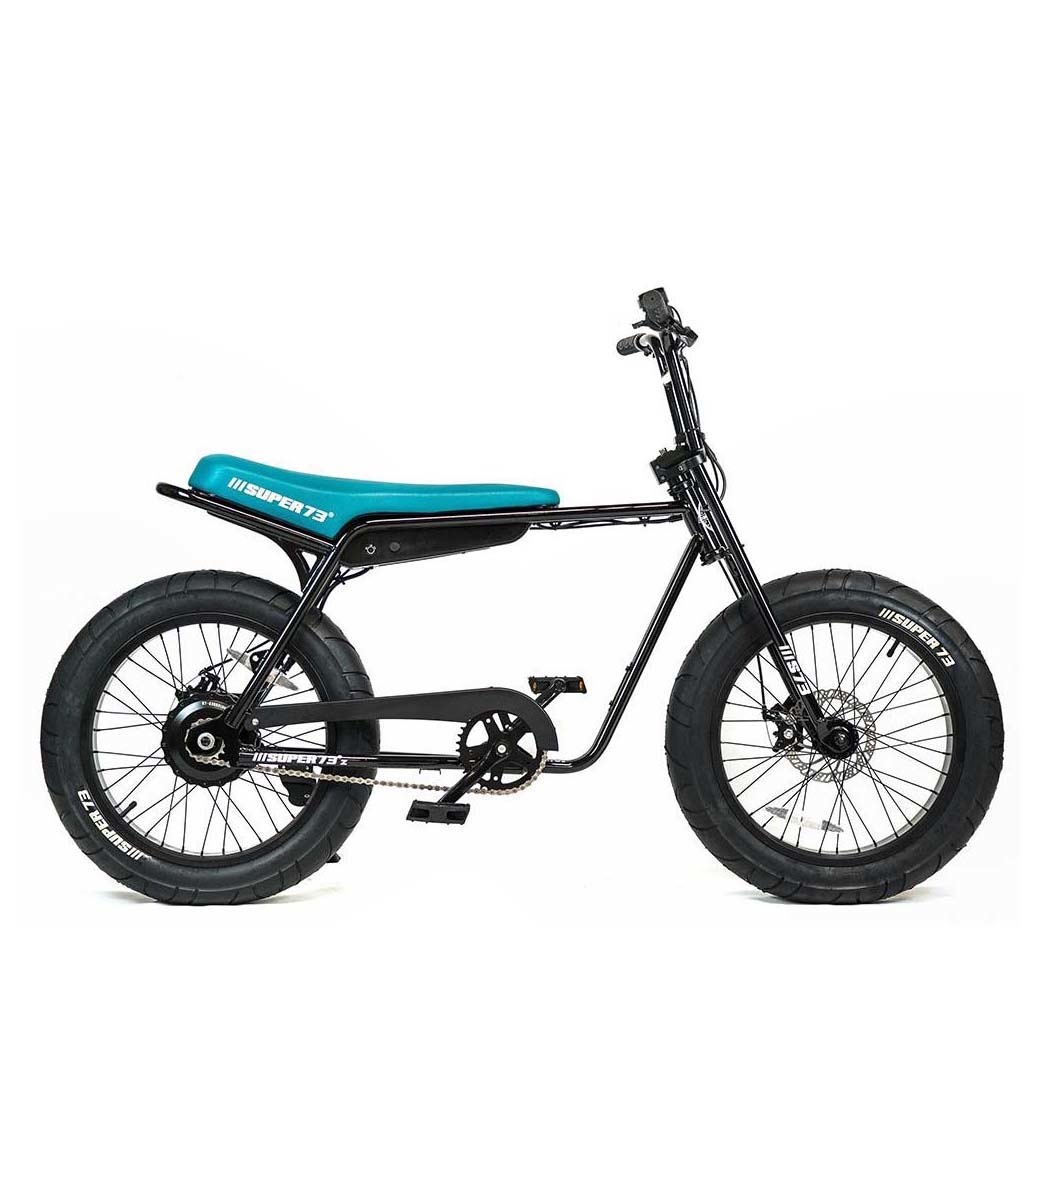 SUPER73-ZG Jet Black The SUPER73-ZG is perfect for exploring the city. The compact frame and the EPAC 250W internal hub motor make an excellent vehicle for anyone who wants the superior feeling of a regular SUPER73 with a smaller frame.